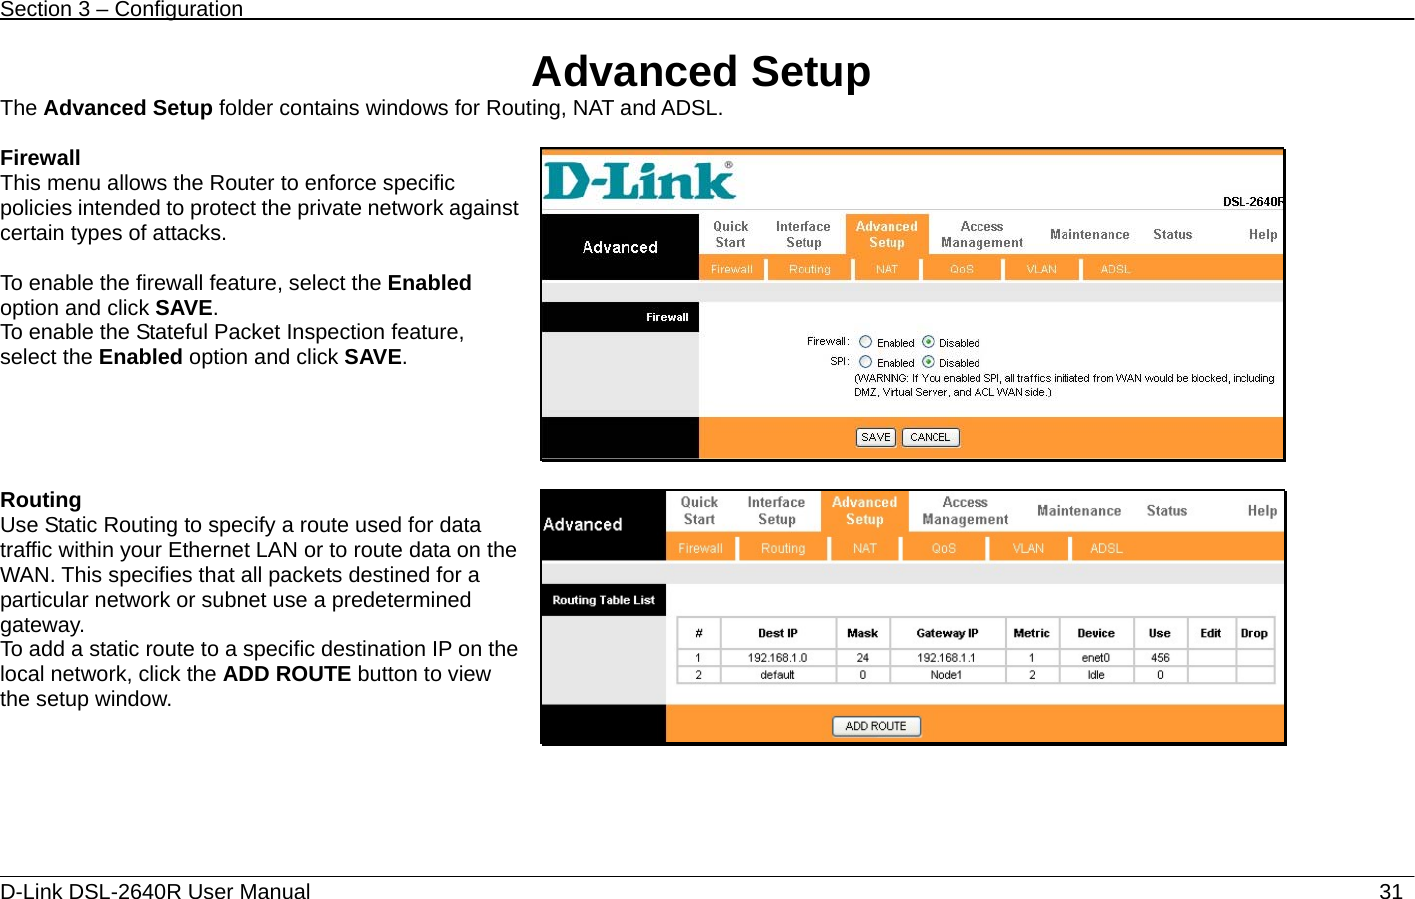 Section 3 – Configuration   D-Link DSL-2640R User Manual                           31Advanced Setup The Advanced Setup folder contains windows for Routing, NAT and ADSL.  Firewall This menu allows the Router to enforce specific policies intended to protect the private network against certain types of attacks.  To enable the firewall feature, select the Enabled option and click SAVE.  To enable the Stateful Packet Inspection feature, select the Enabled option and click SAVE.    Routing Use Static Routing to specify a route used for data traffic within your Ethernet LAN or to route data on the WAN. This specifies that all packets destined for a particular network or subnet use a predetermined gateway. To add a static route to a specific destination IP on the local network, click the ADD ROUTE button to view the setup window.  